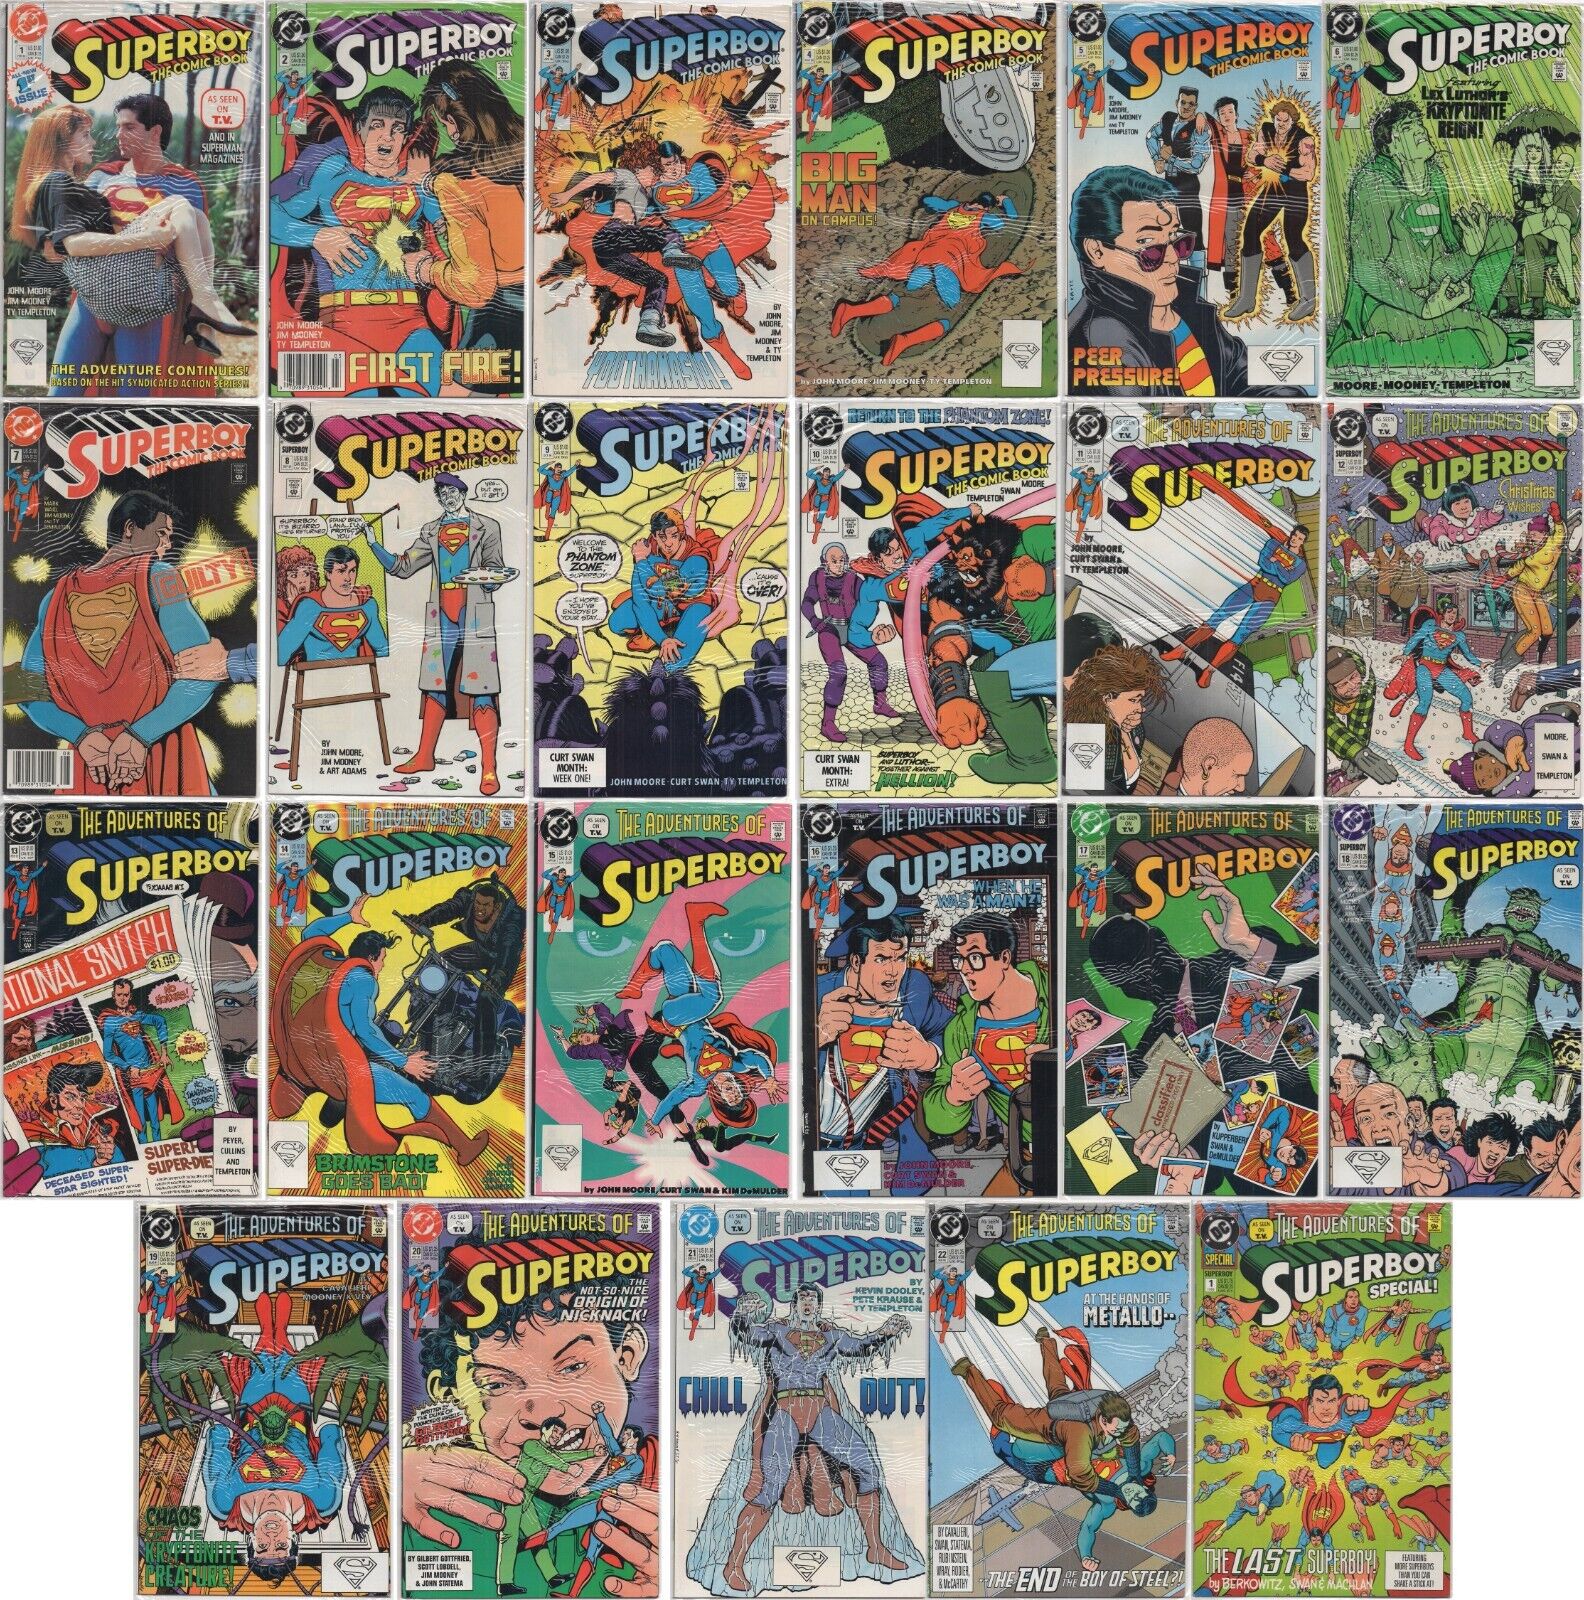 Superboy (1990) #1-22 and Special 1 (based on television show) DC Comics